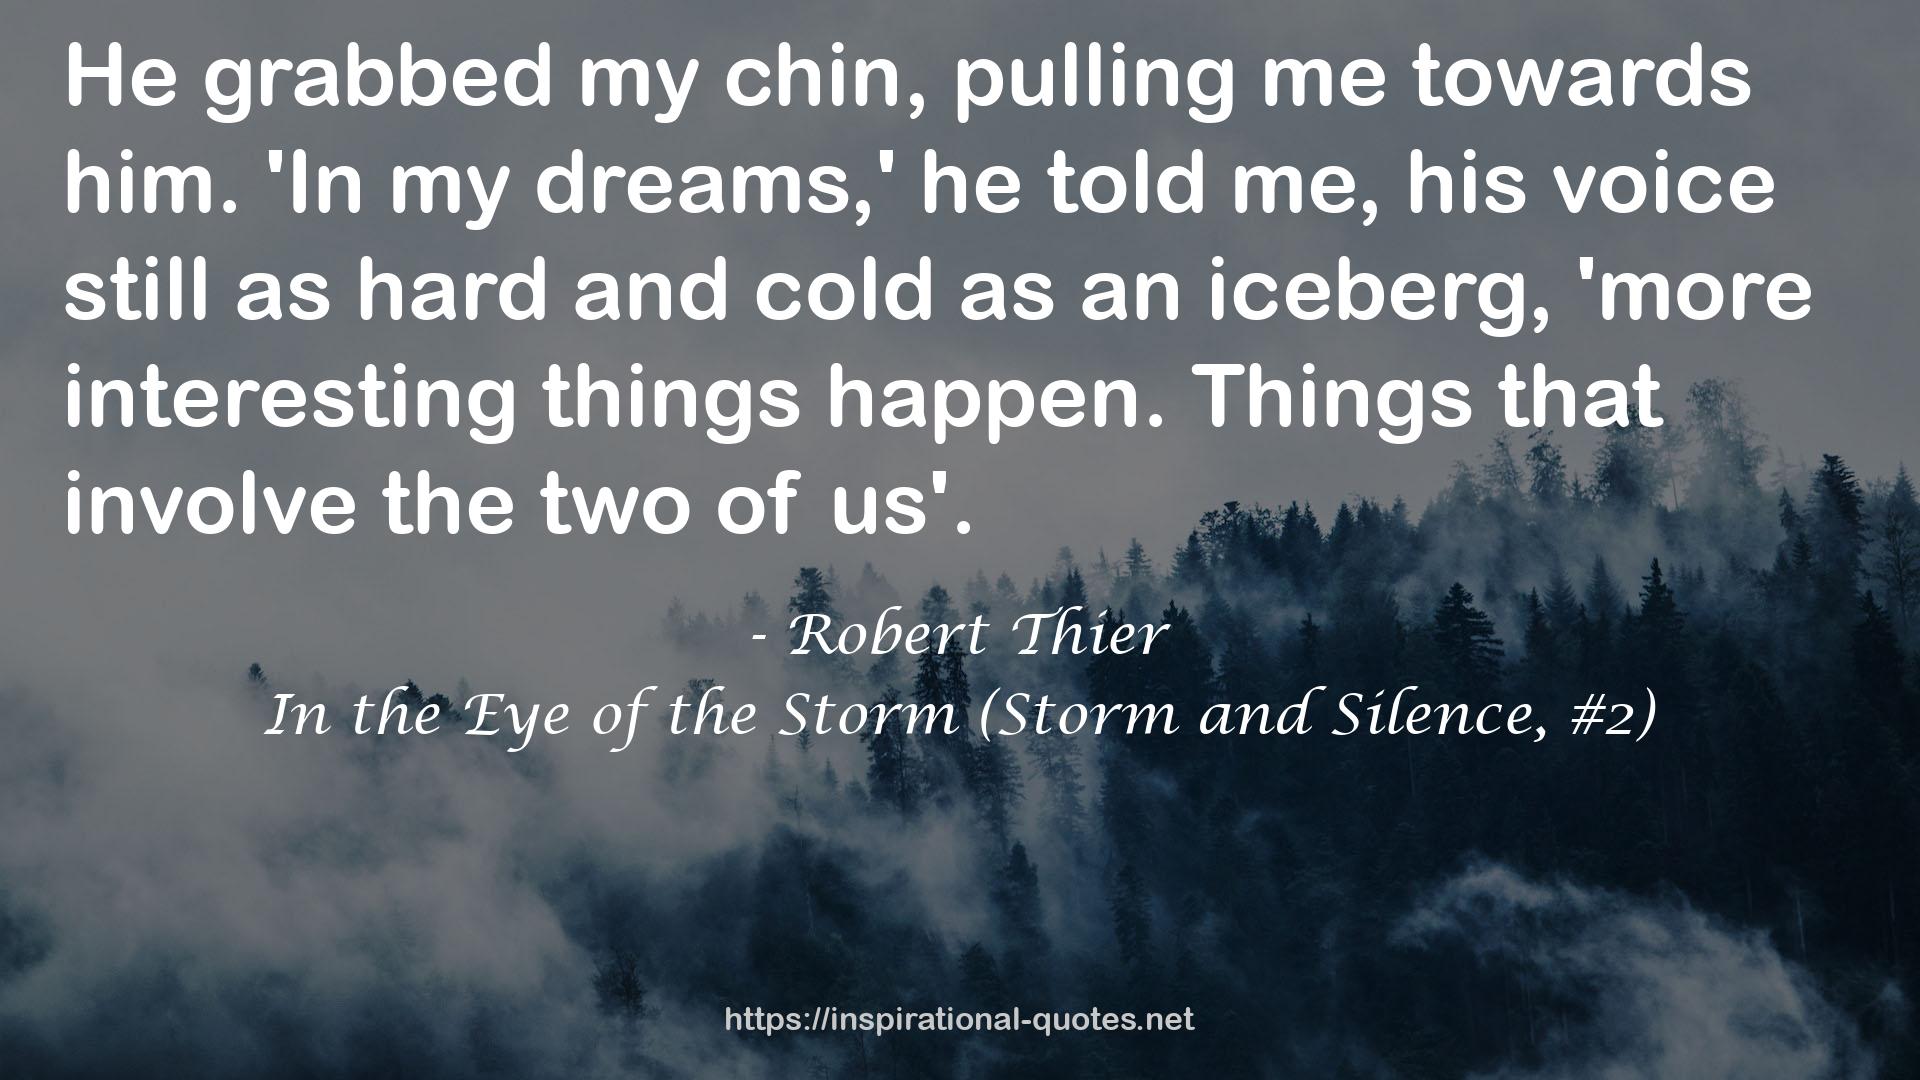 In the Eye of the Storm (Storm and Silence, #2) QUOTES